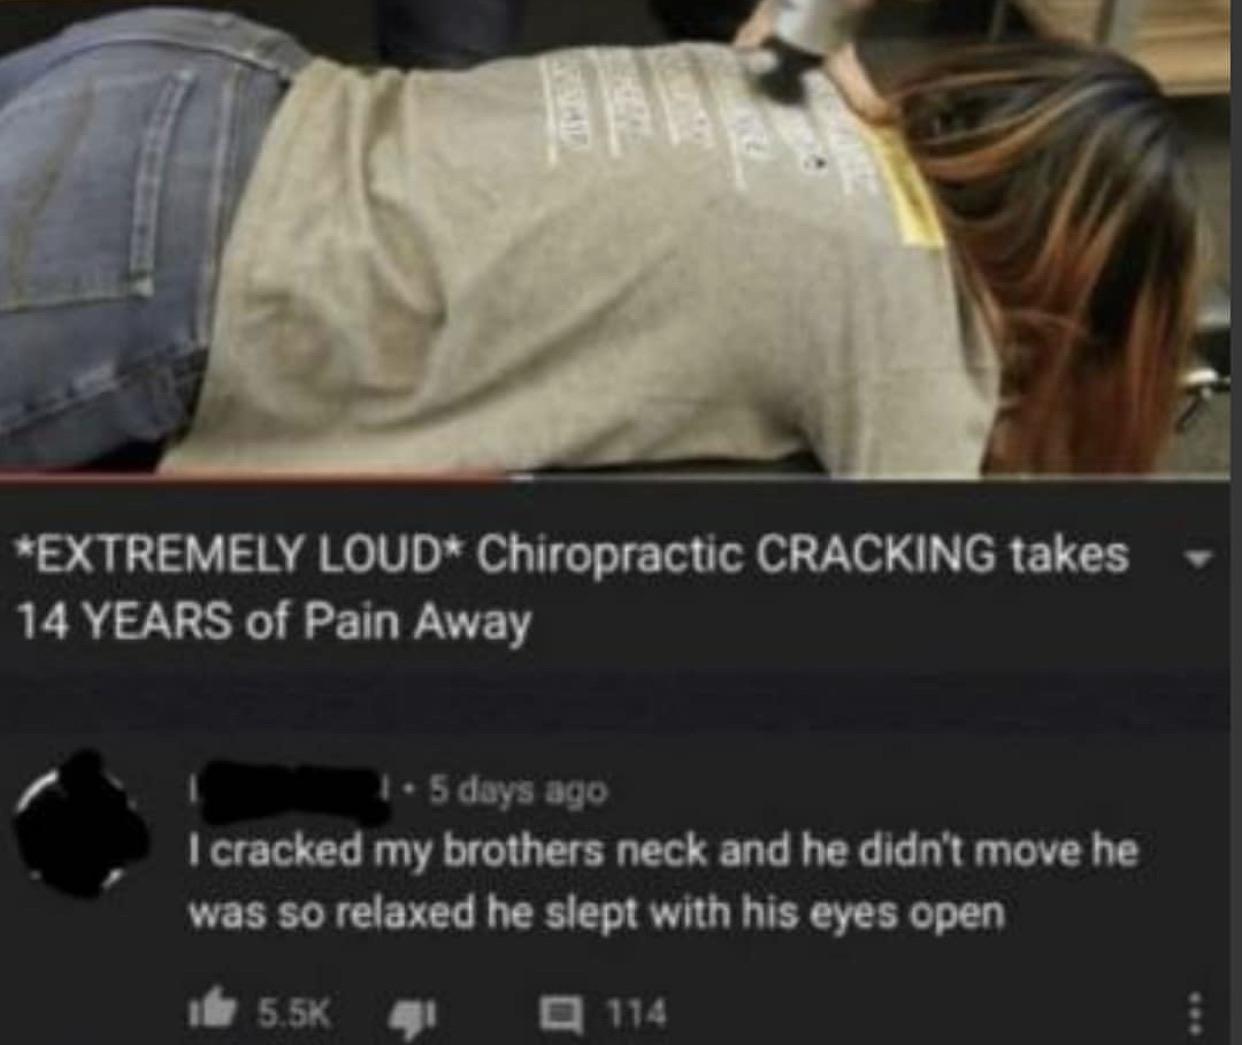 chiropractic takes 14 years of pain away meme - Extremely Loud Chiropractic Cracking takes 14 Years of Pain Away 1. 5 days ago I cracked my brothers neck and he didn't move he was so relaxed he slept with his eyes open it 1 114